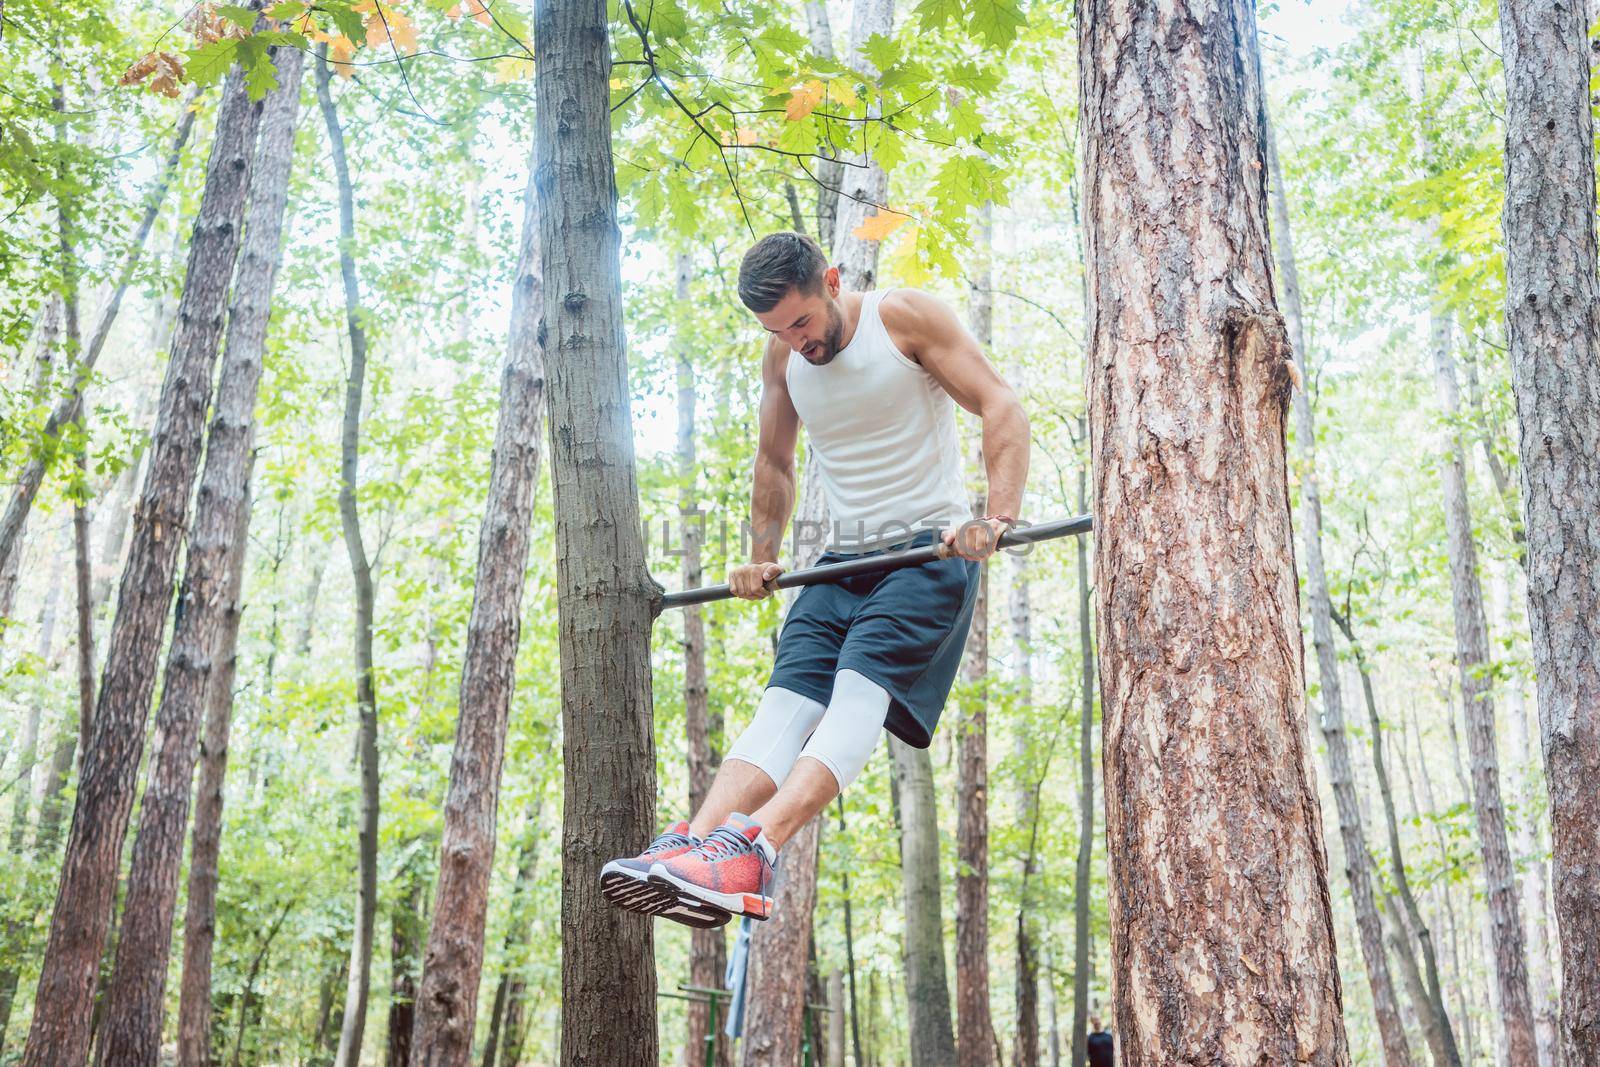 Man doing gymnastics on high bar in the woods by Kzenon